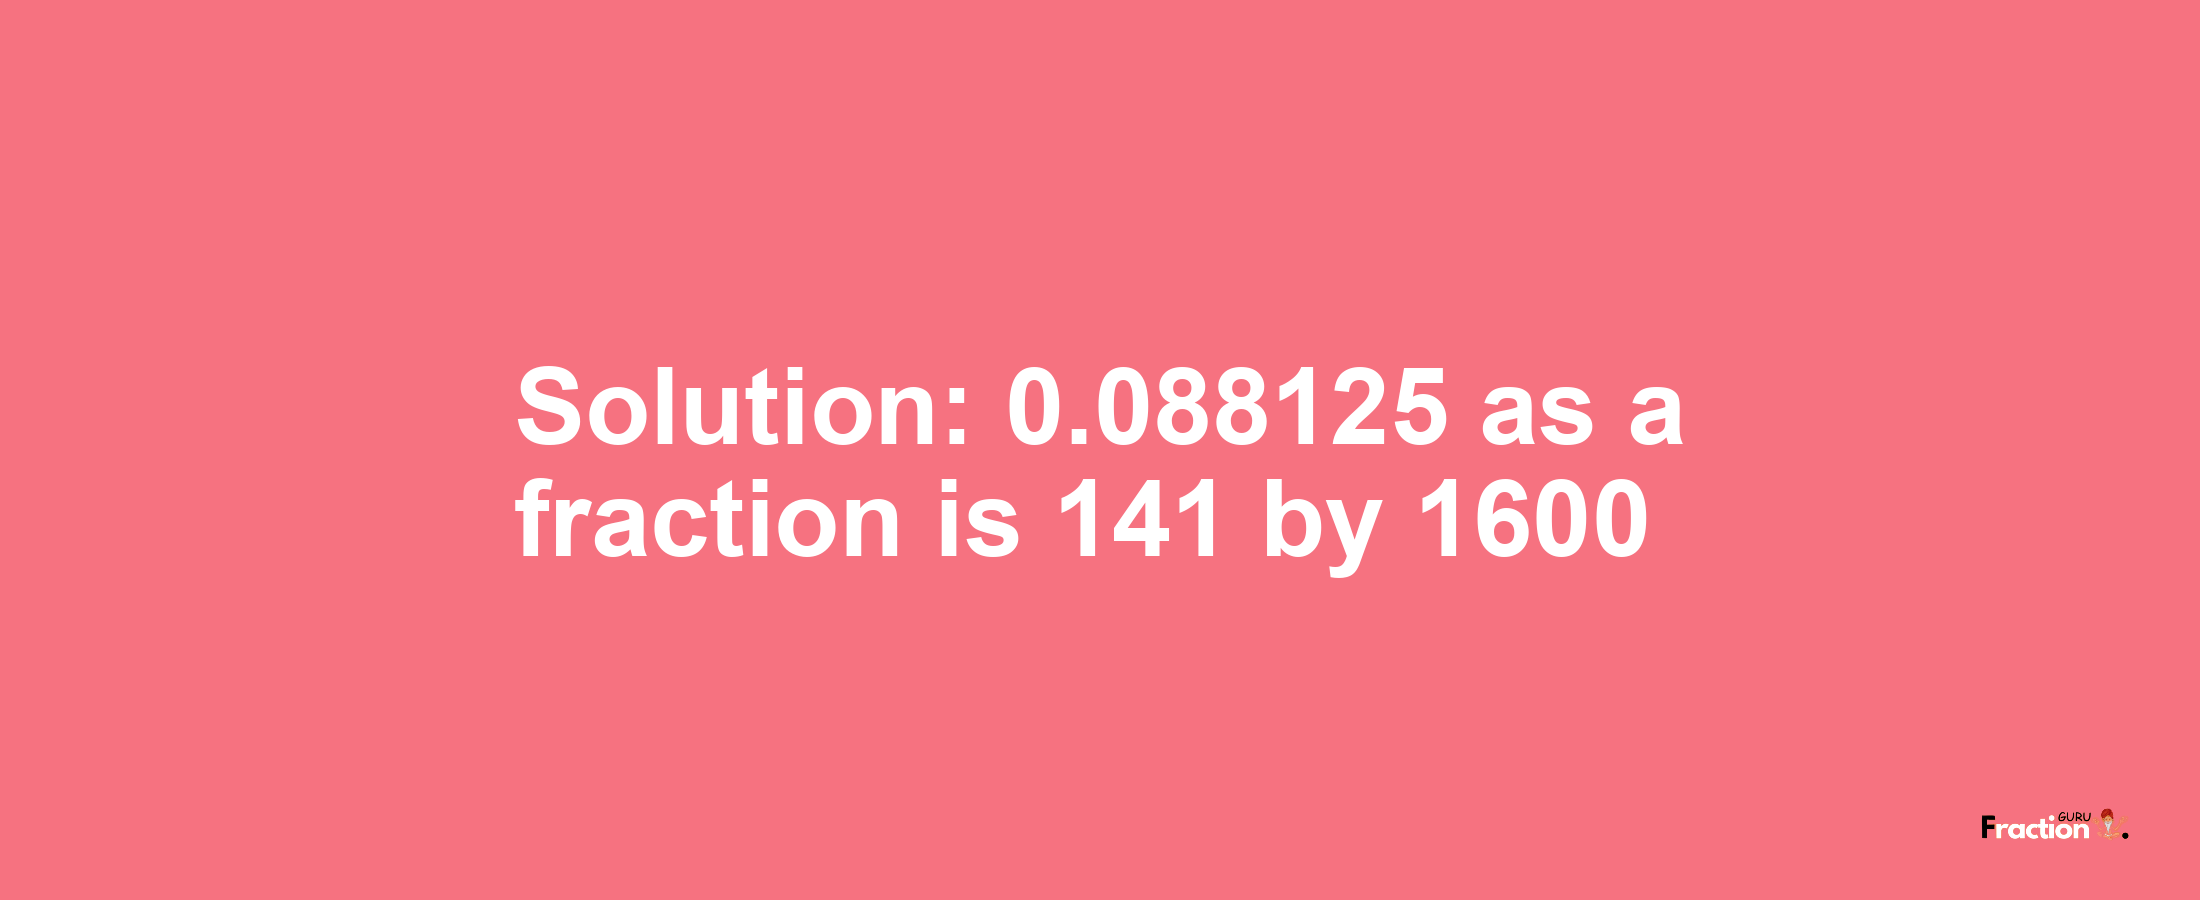 Solution:0.088125 as a fraction is 141/1600